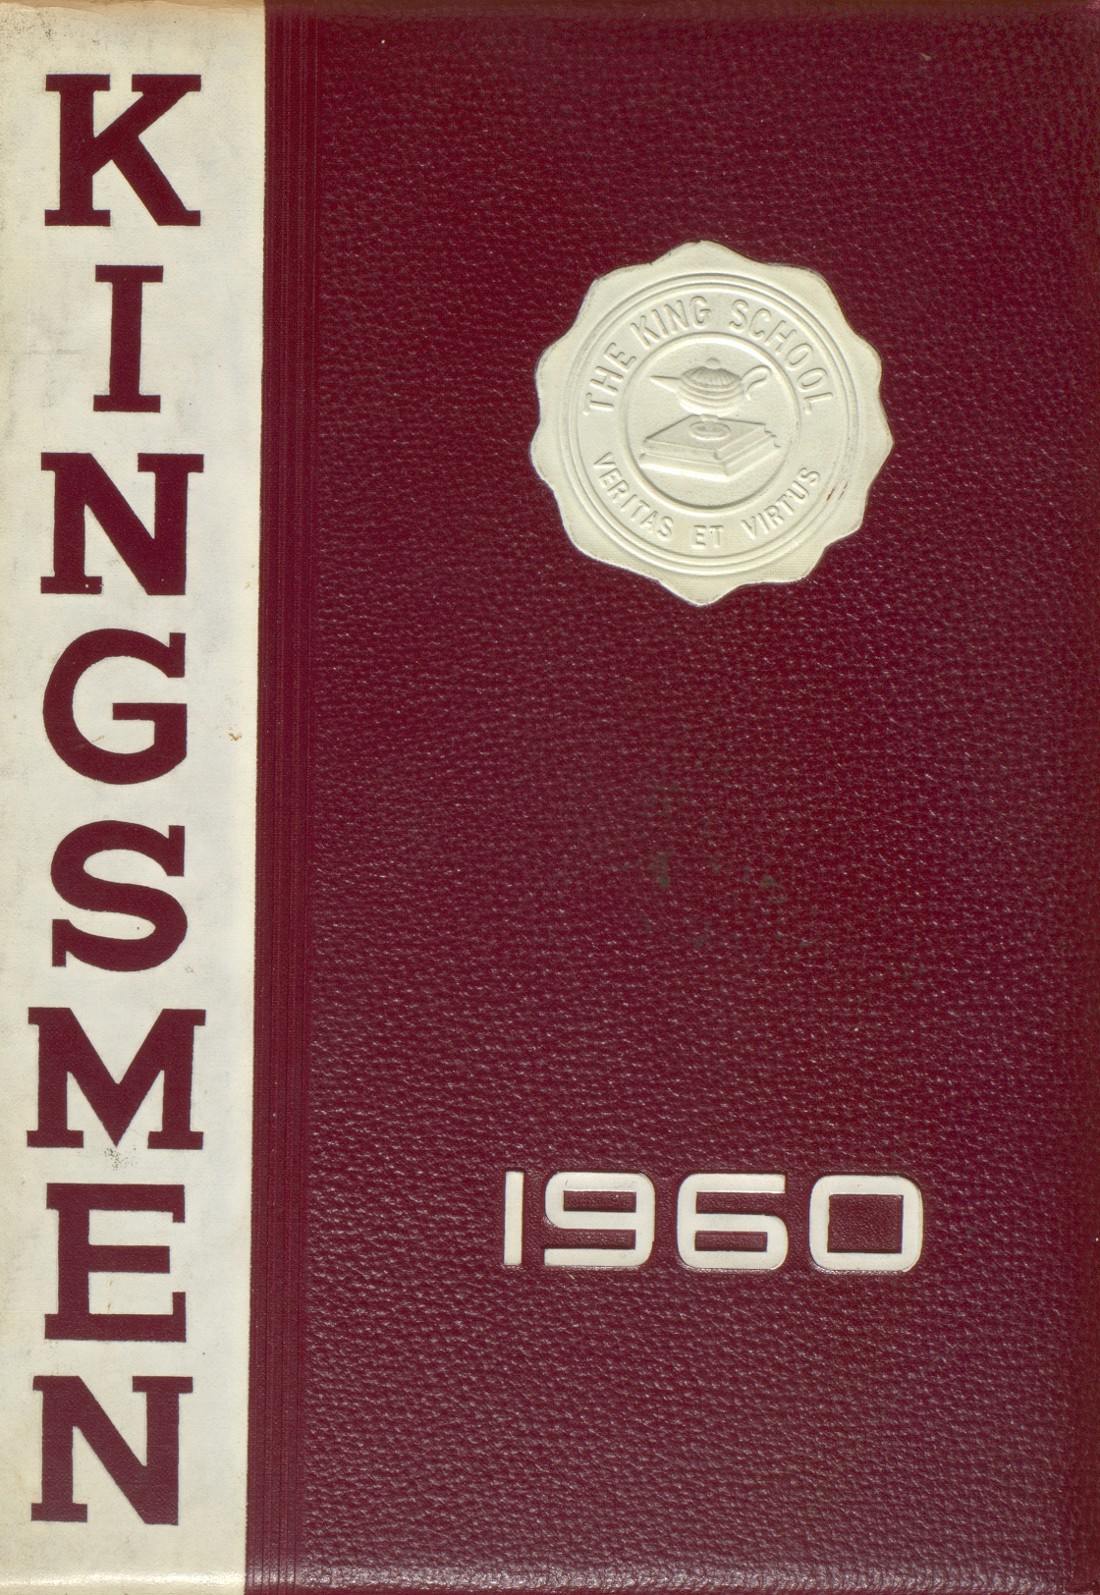 1960 yearbook from King/LowHeywood Thomas High School from Stamford